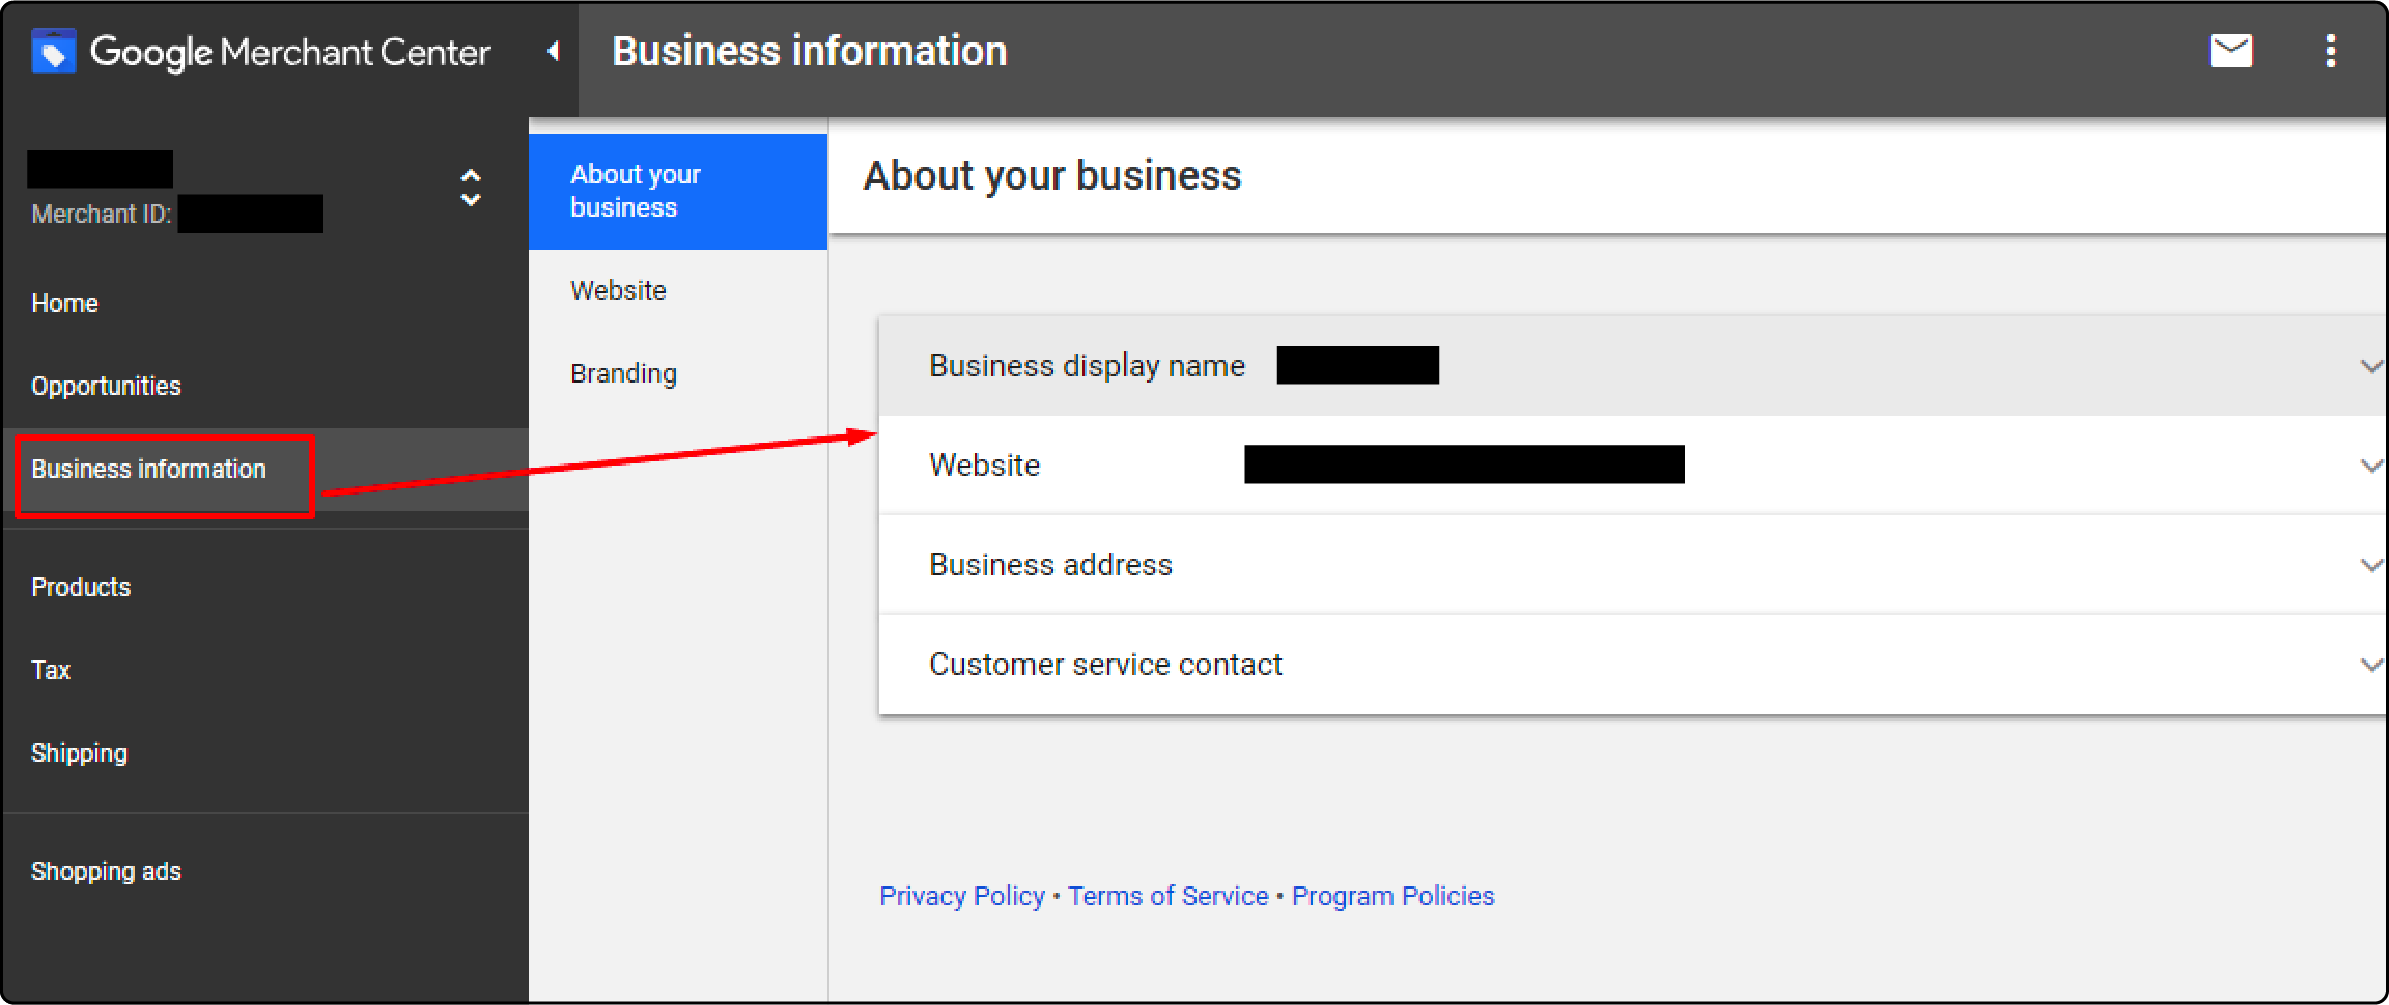 Google Merchant Business Information menu for product feed import in Magento